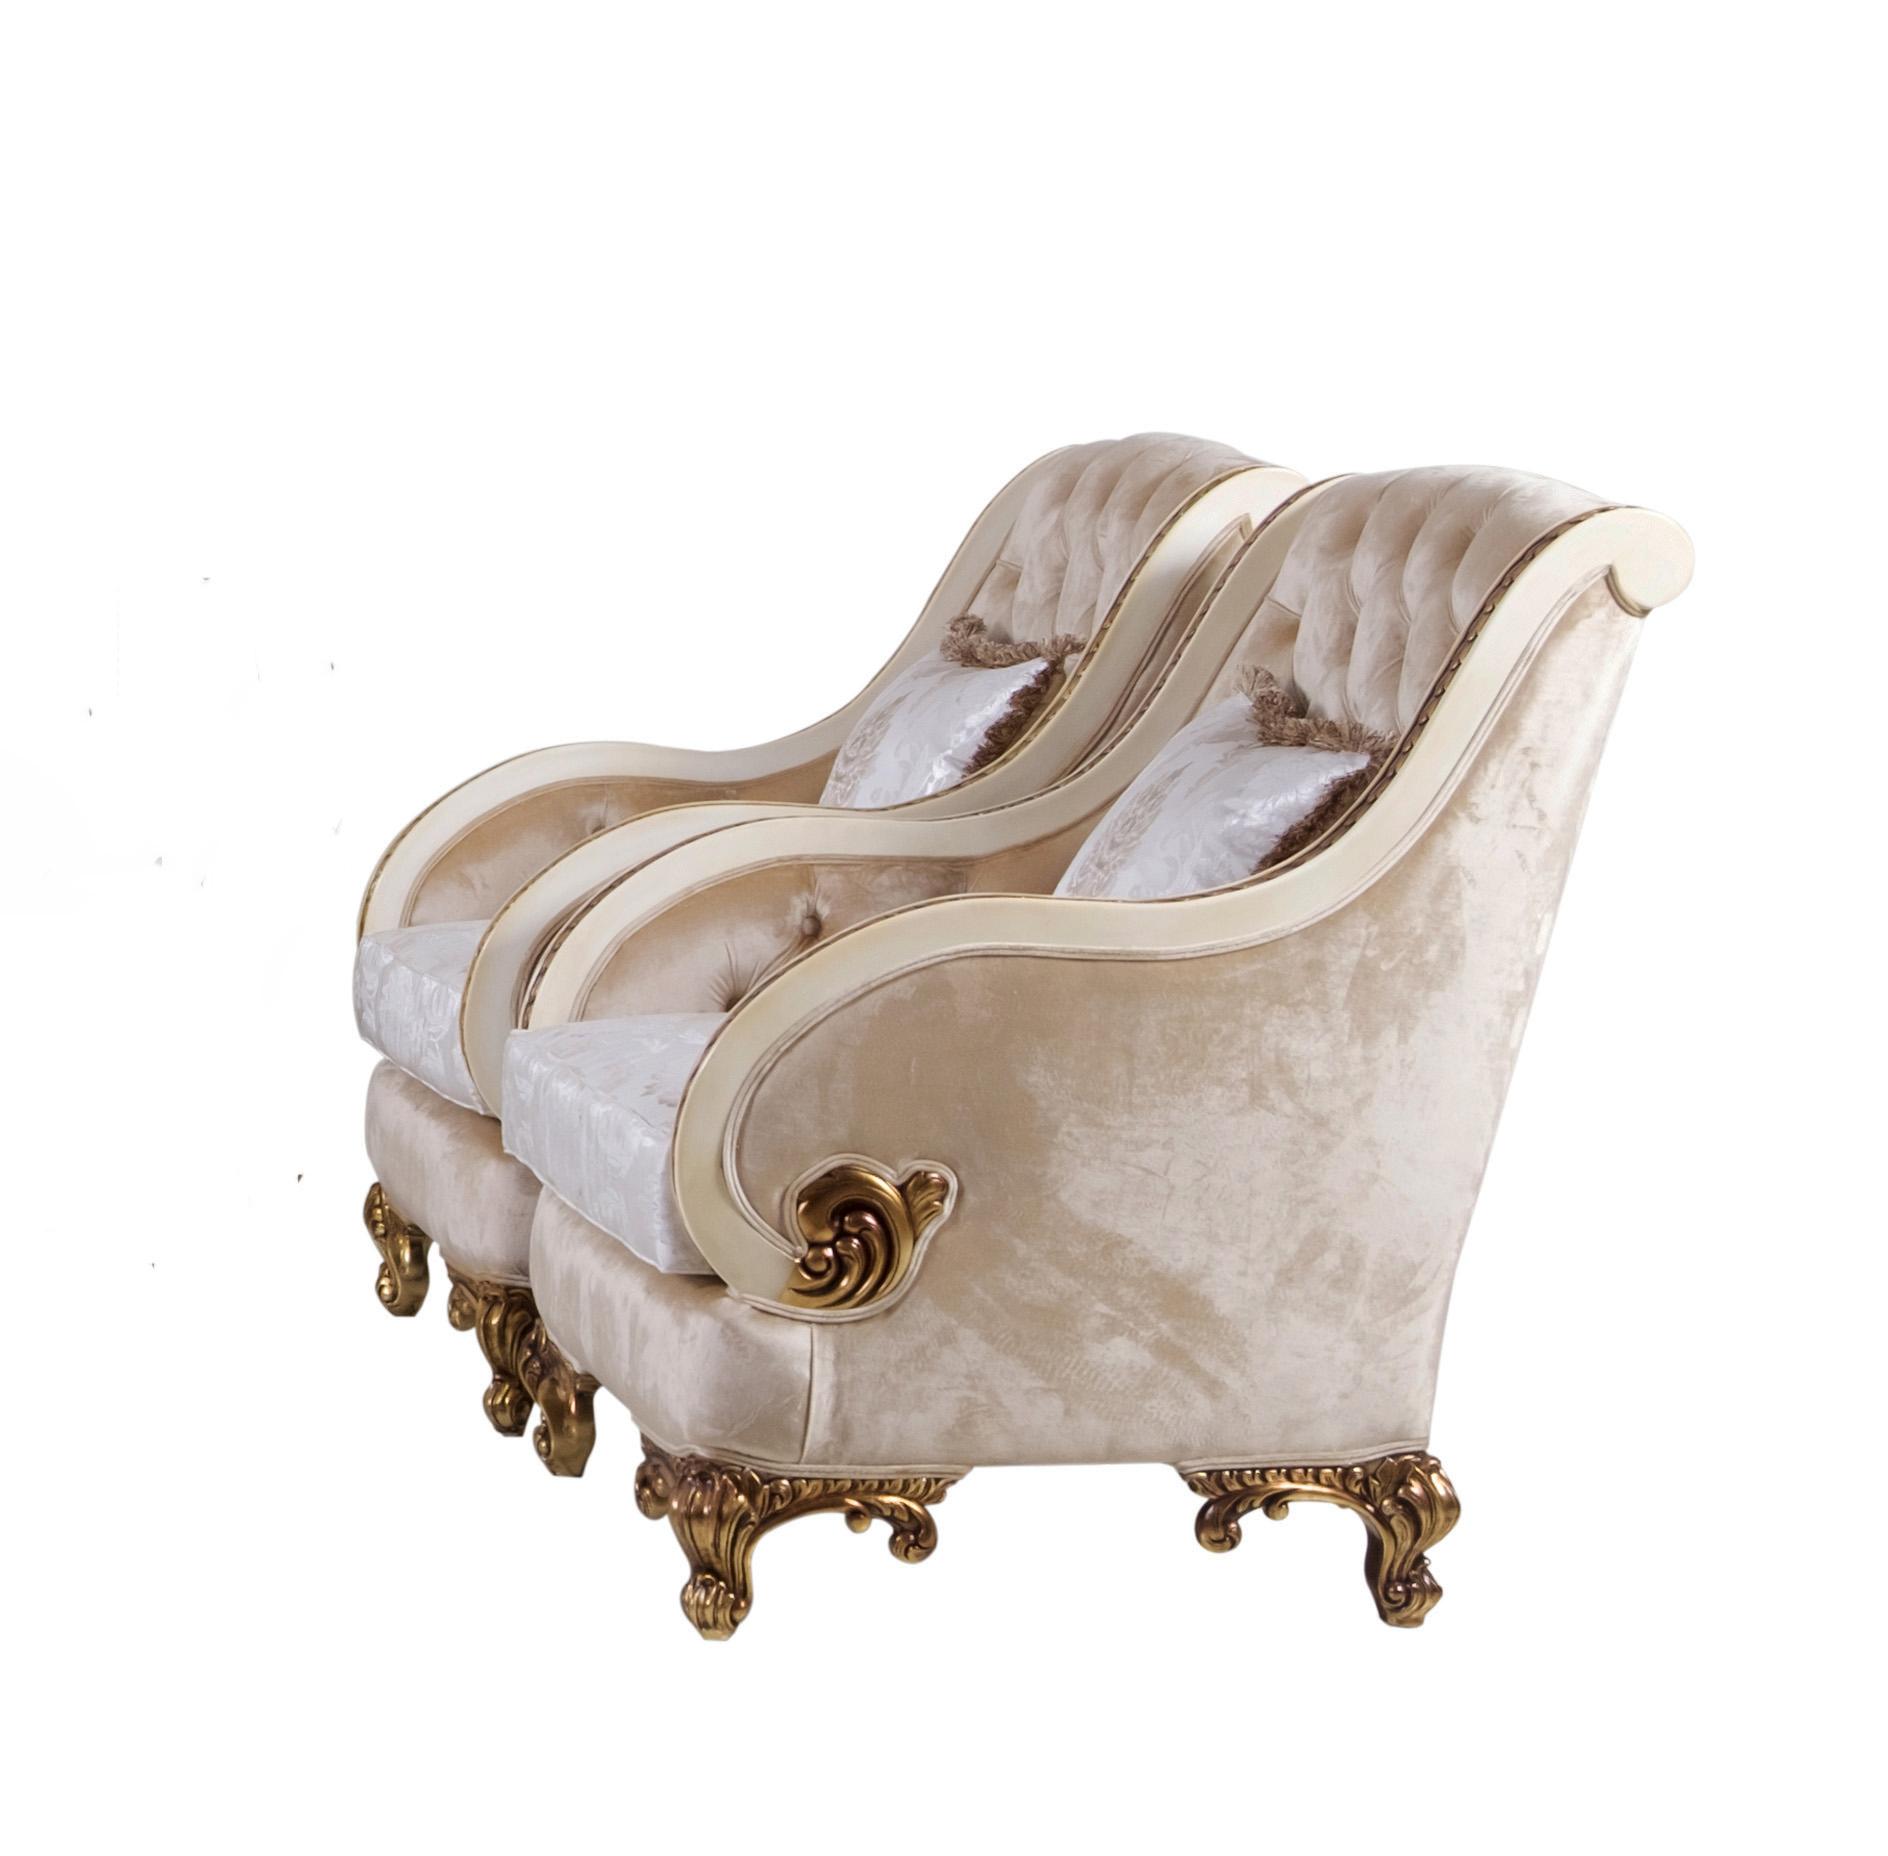 Classic, Traditional Arm Chair Set ROSABELLA 36031-C-Set-2 in Antique, Gold, Beige Fabric